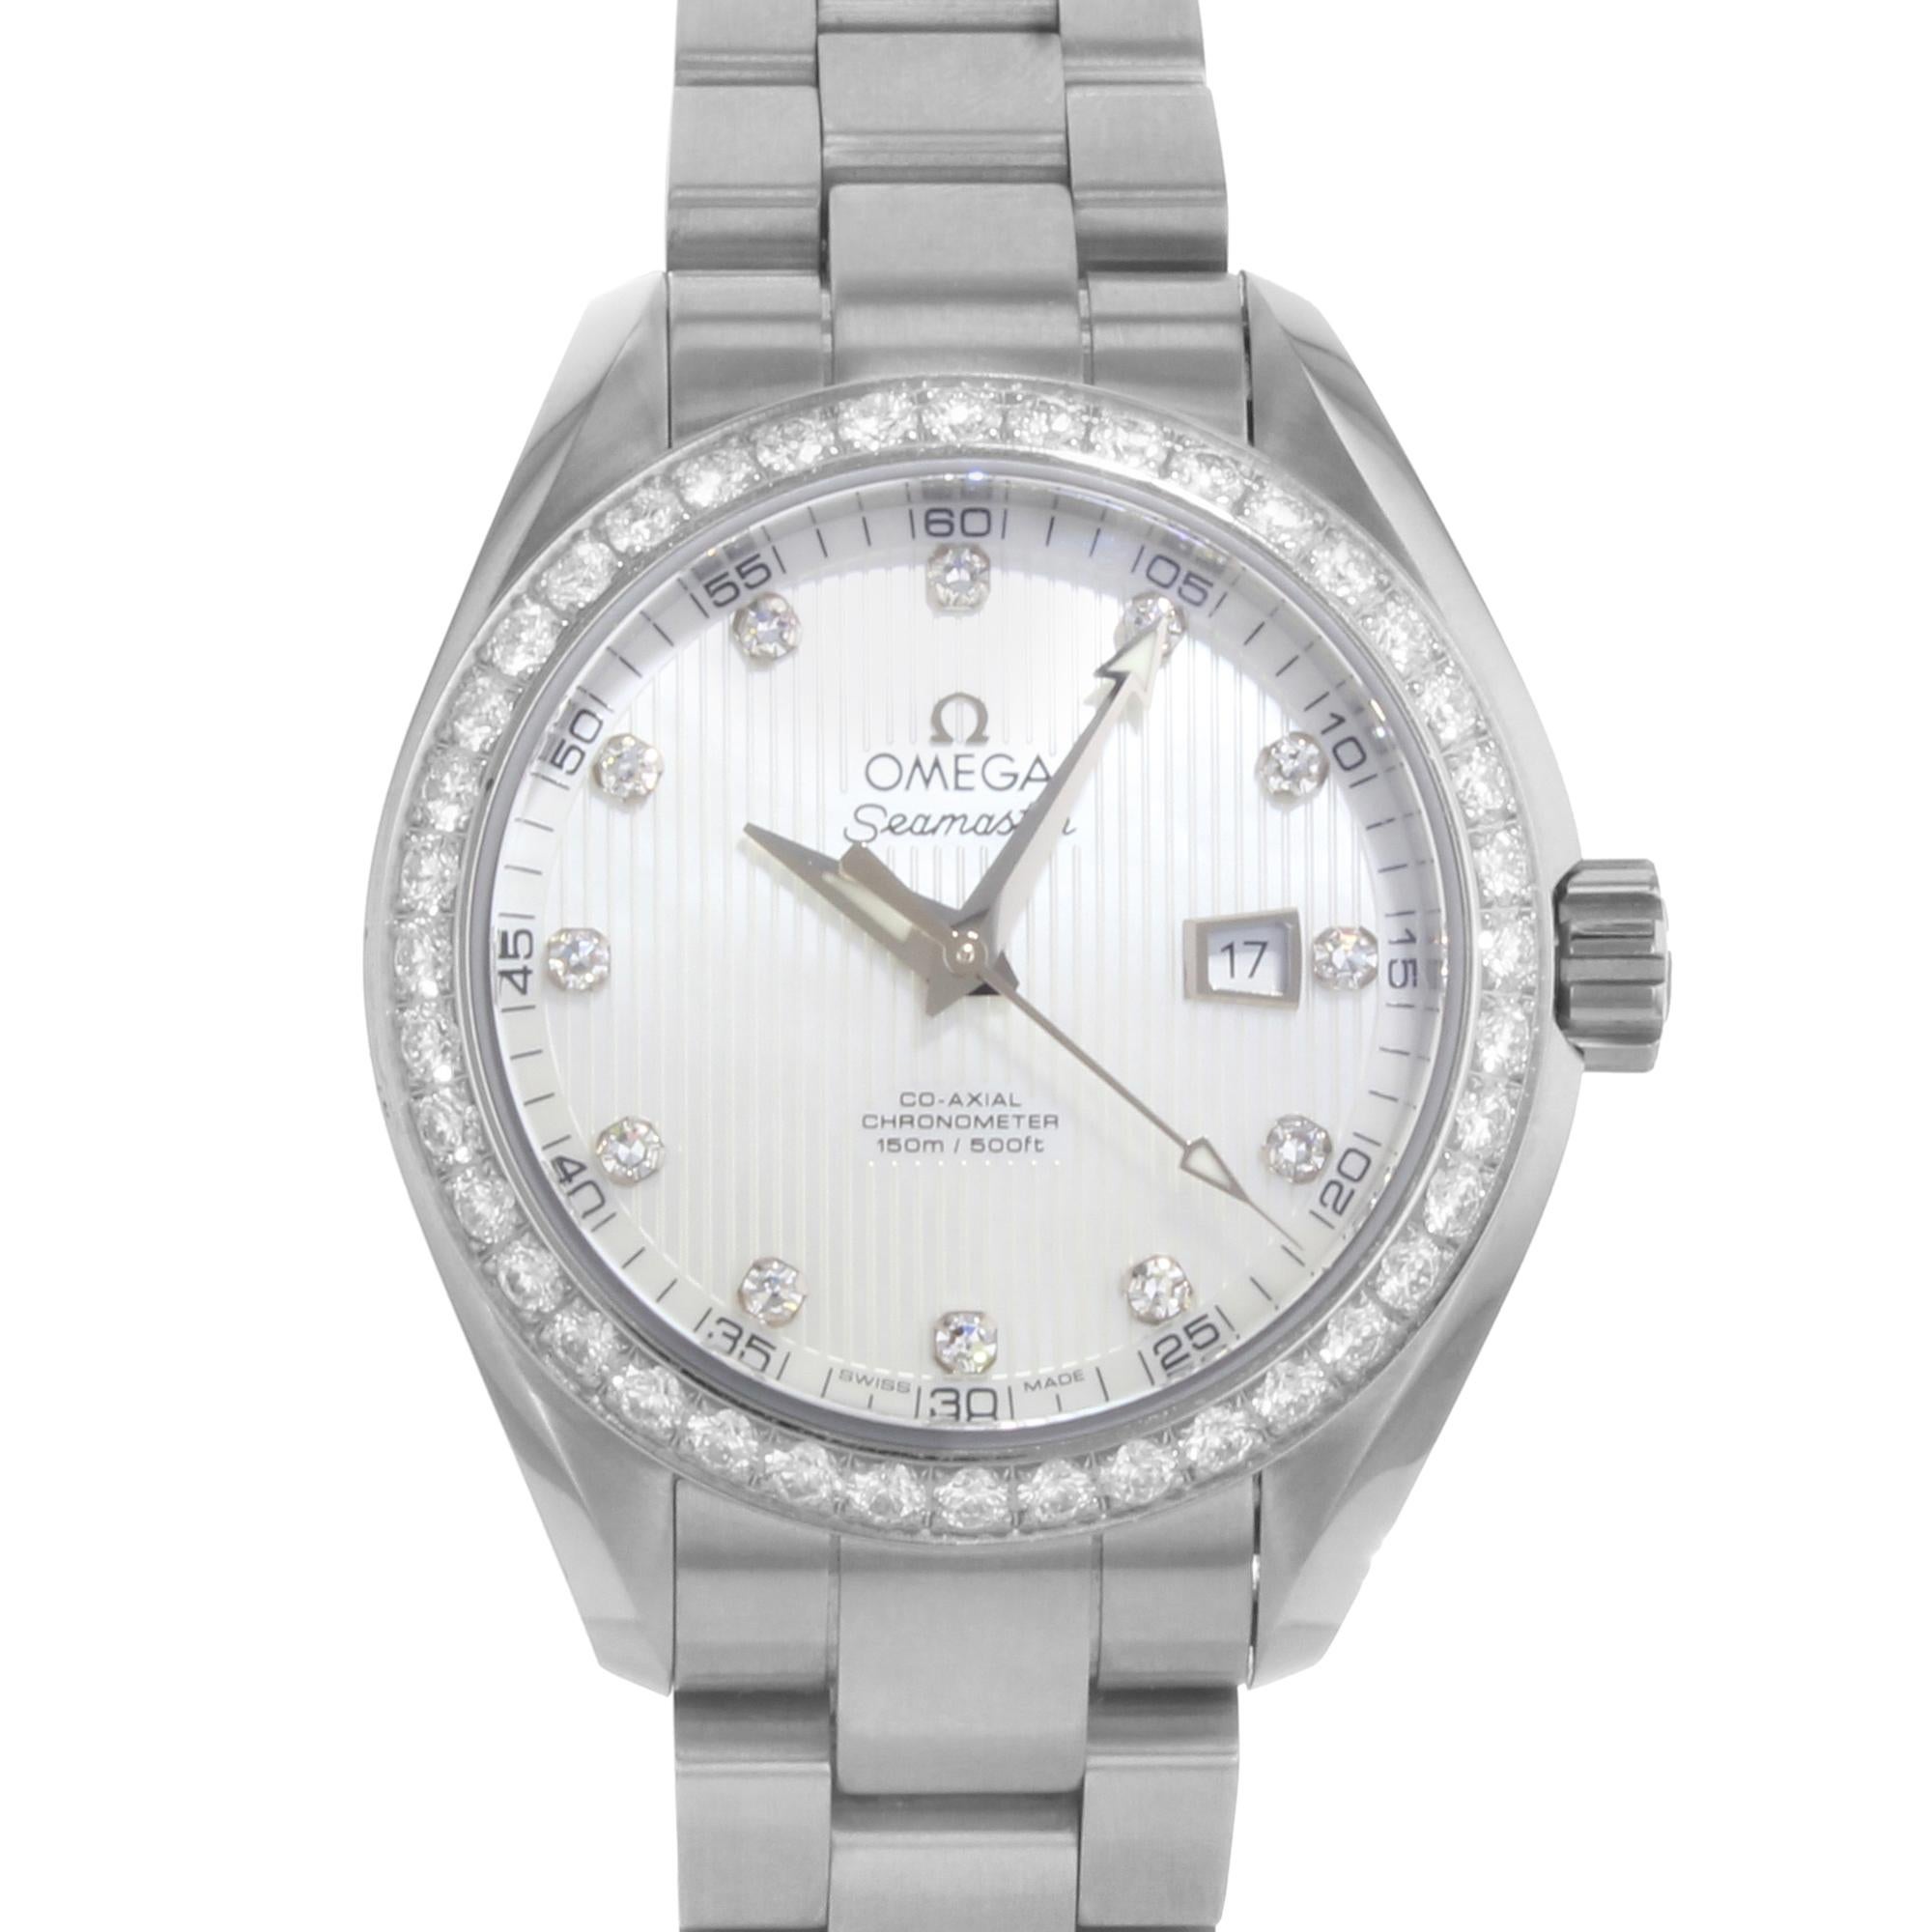 This display model Omega Seamaster 231.15.34.20.55.001 is a beautiful Ladies timepiece that is powered by an automatic movement which is cased in a stainless steel case. It has a round shape face, date, diamonds dial, and has hand diamonds style